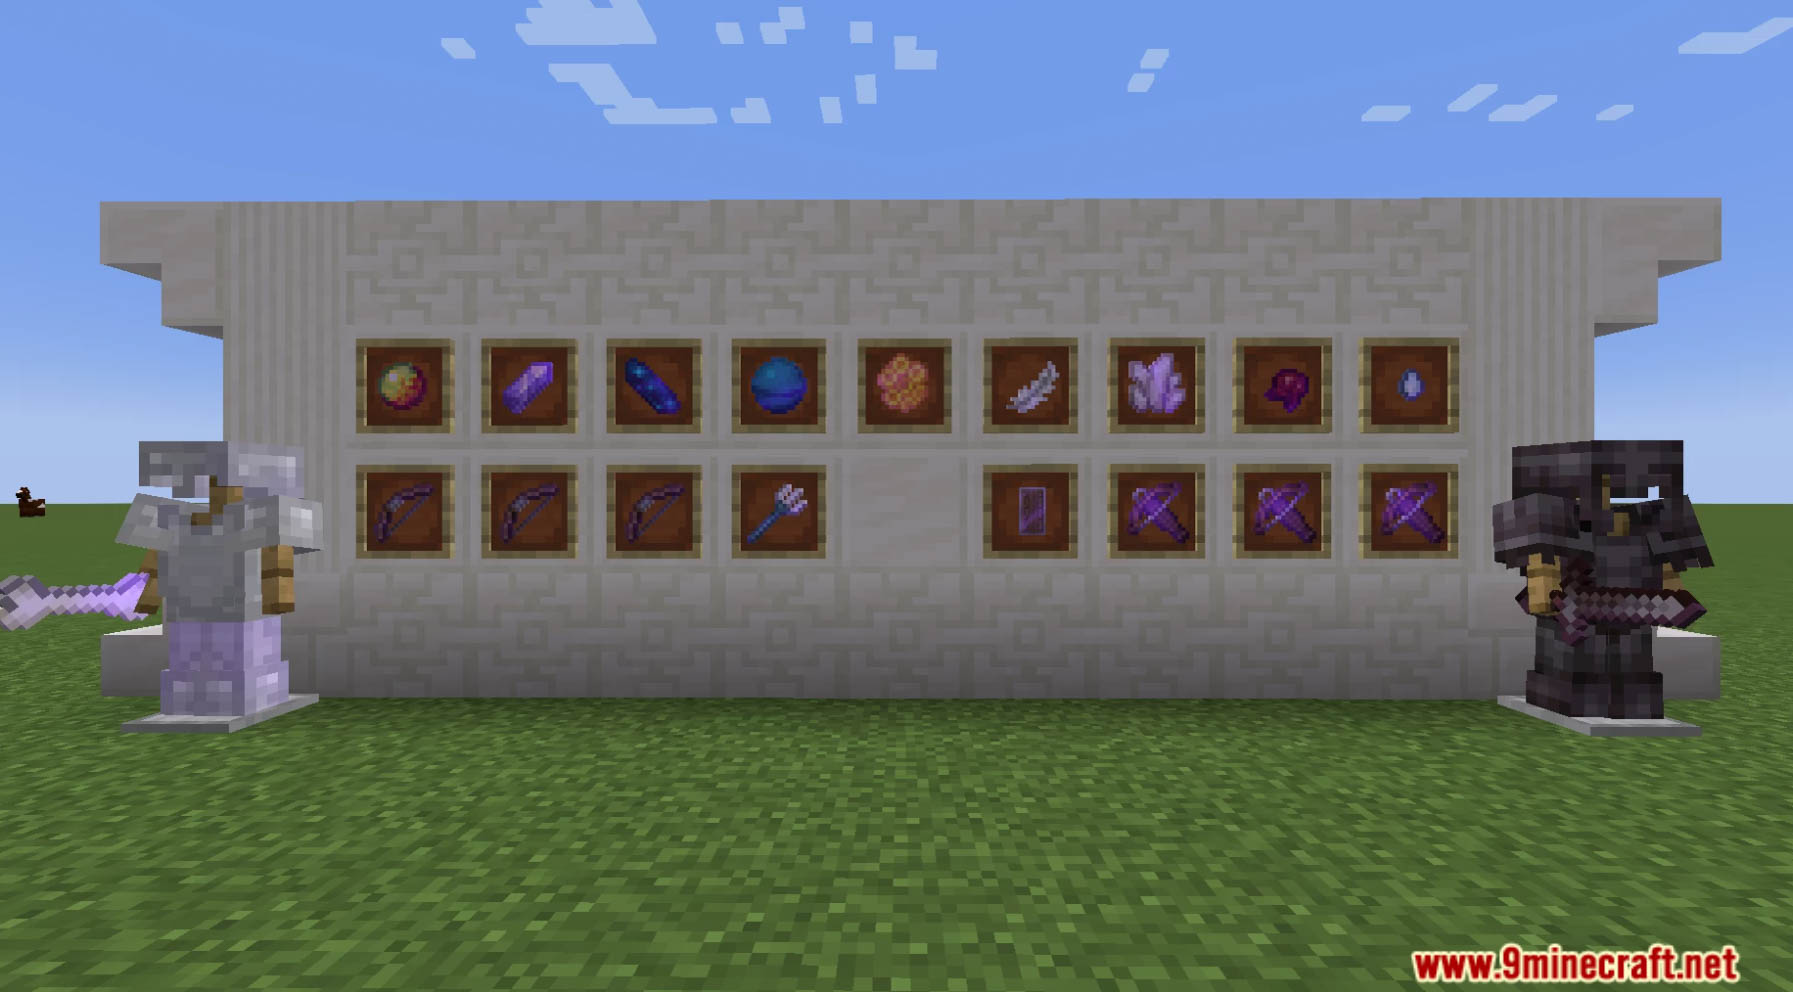 Better Items Data Pack (1.20.4, 1.19.4) - Unleash Power With Better Weapons And Items Data Pack! 2